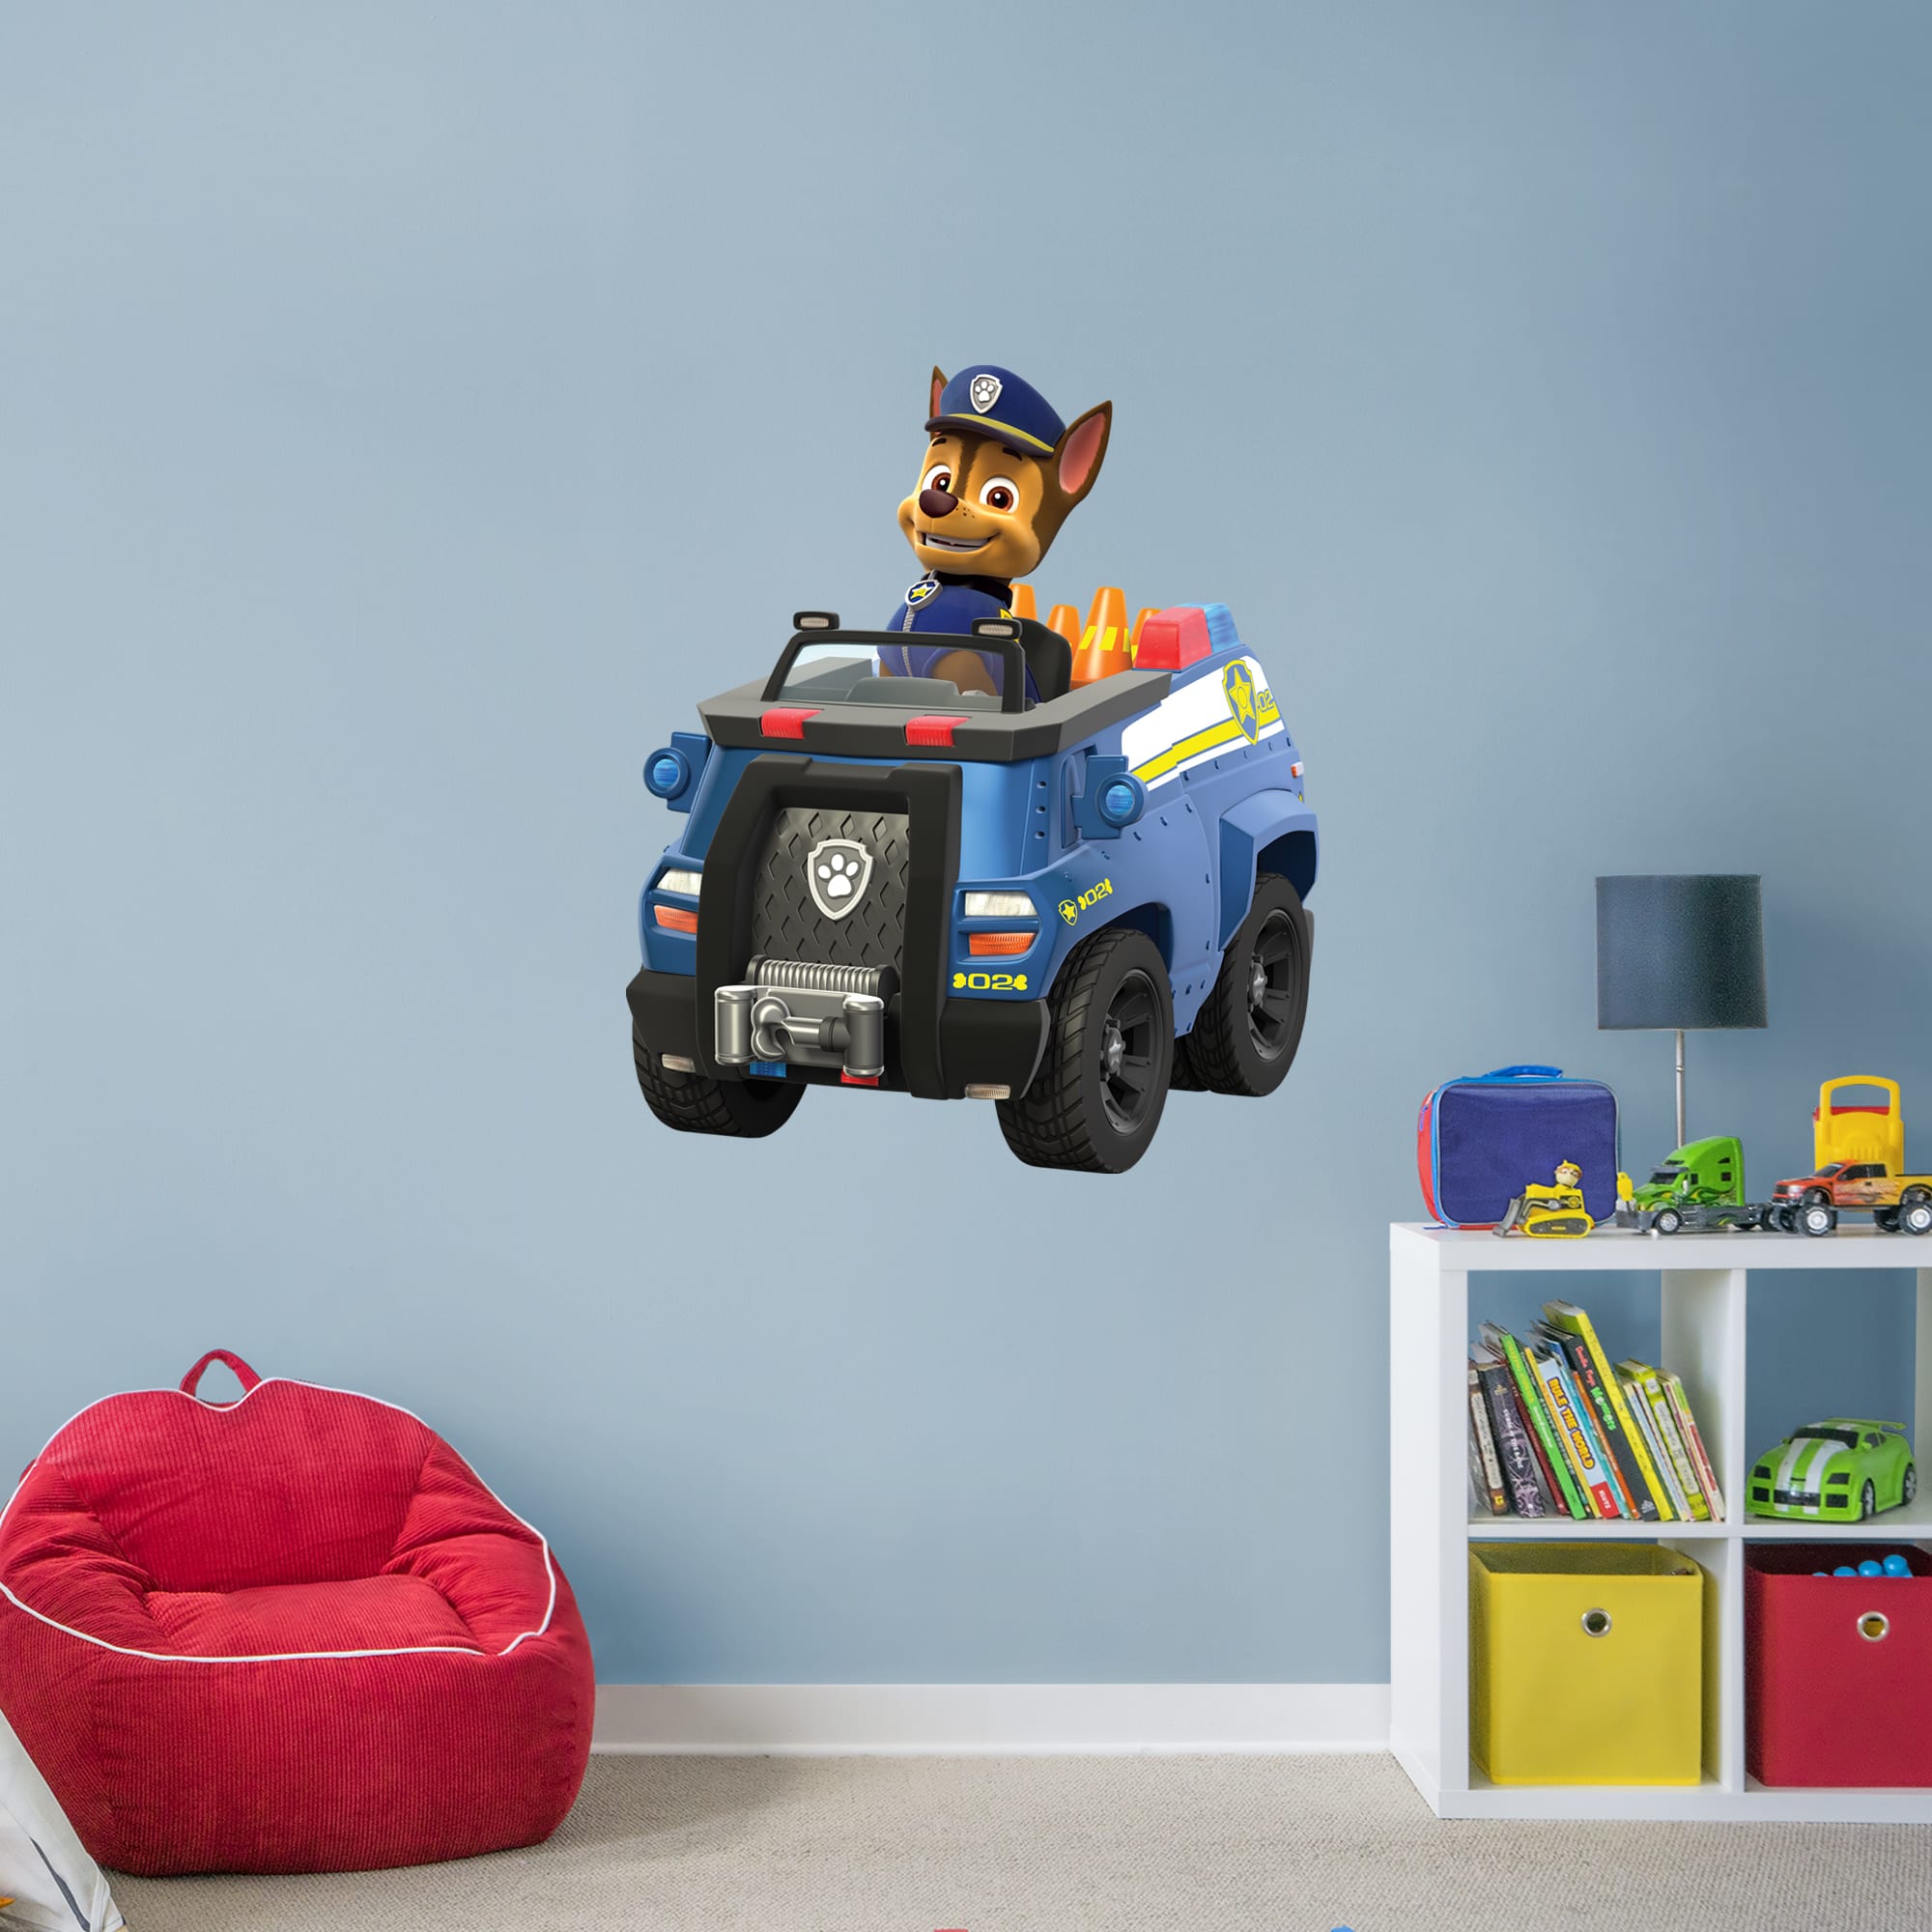 PAW Patrol: Chases Police Truck - Officially Licensed Removable Wall Decal Giant Character + 2 Licensed Decals (38"W x 45"H) by